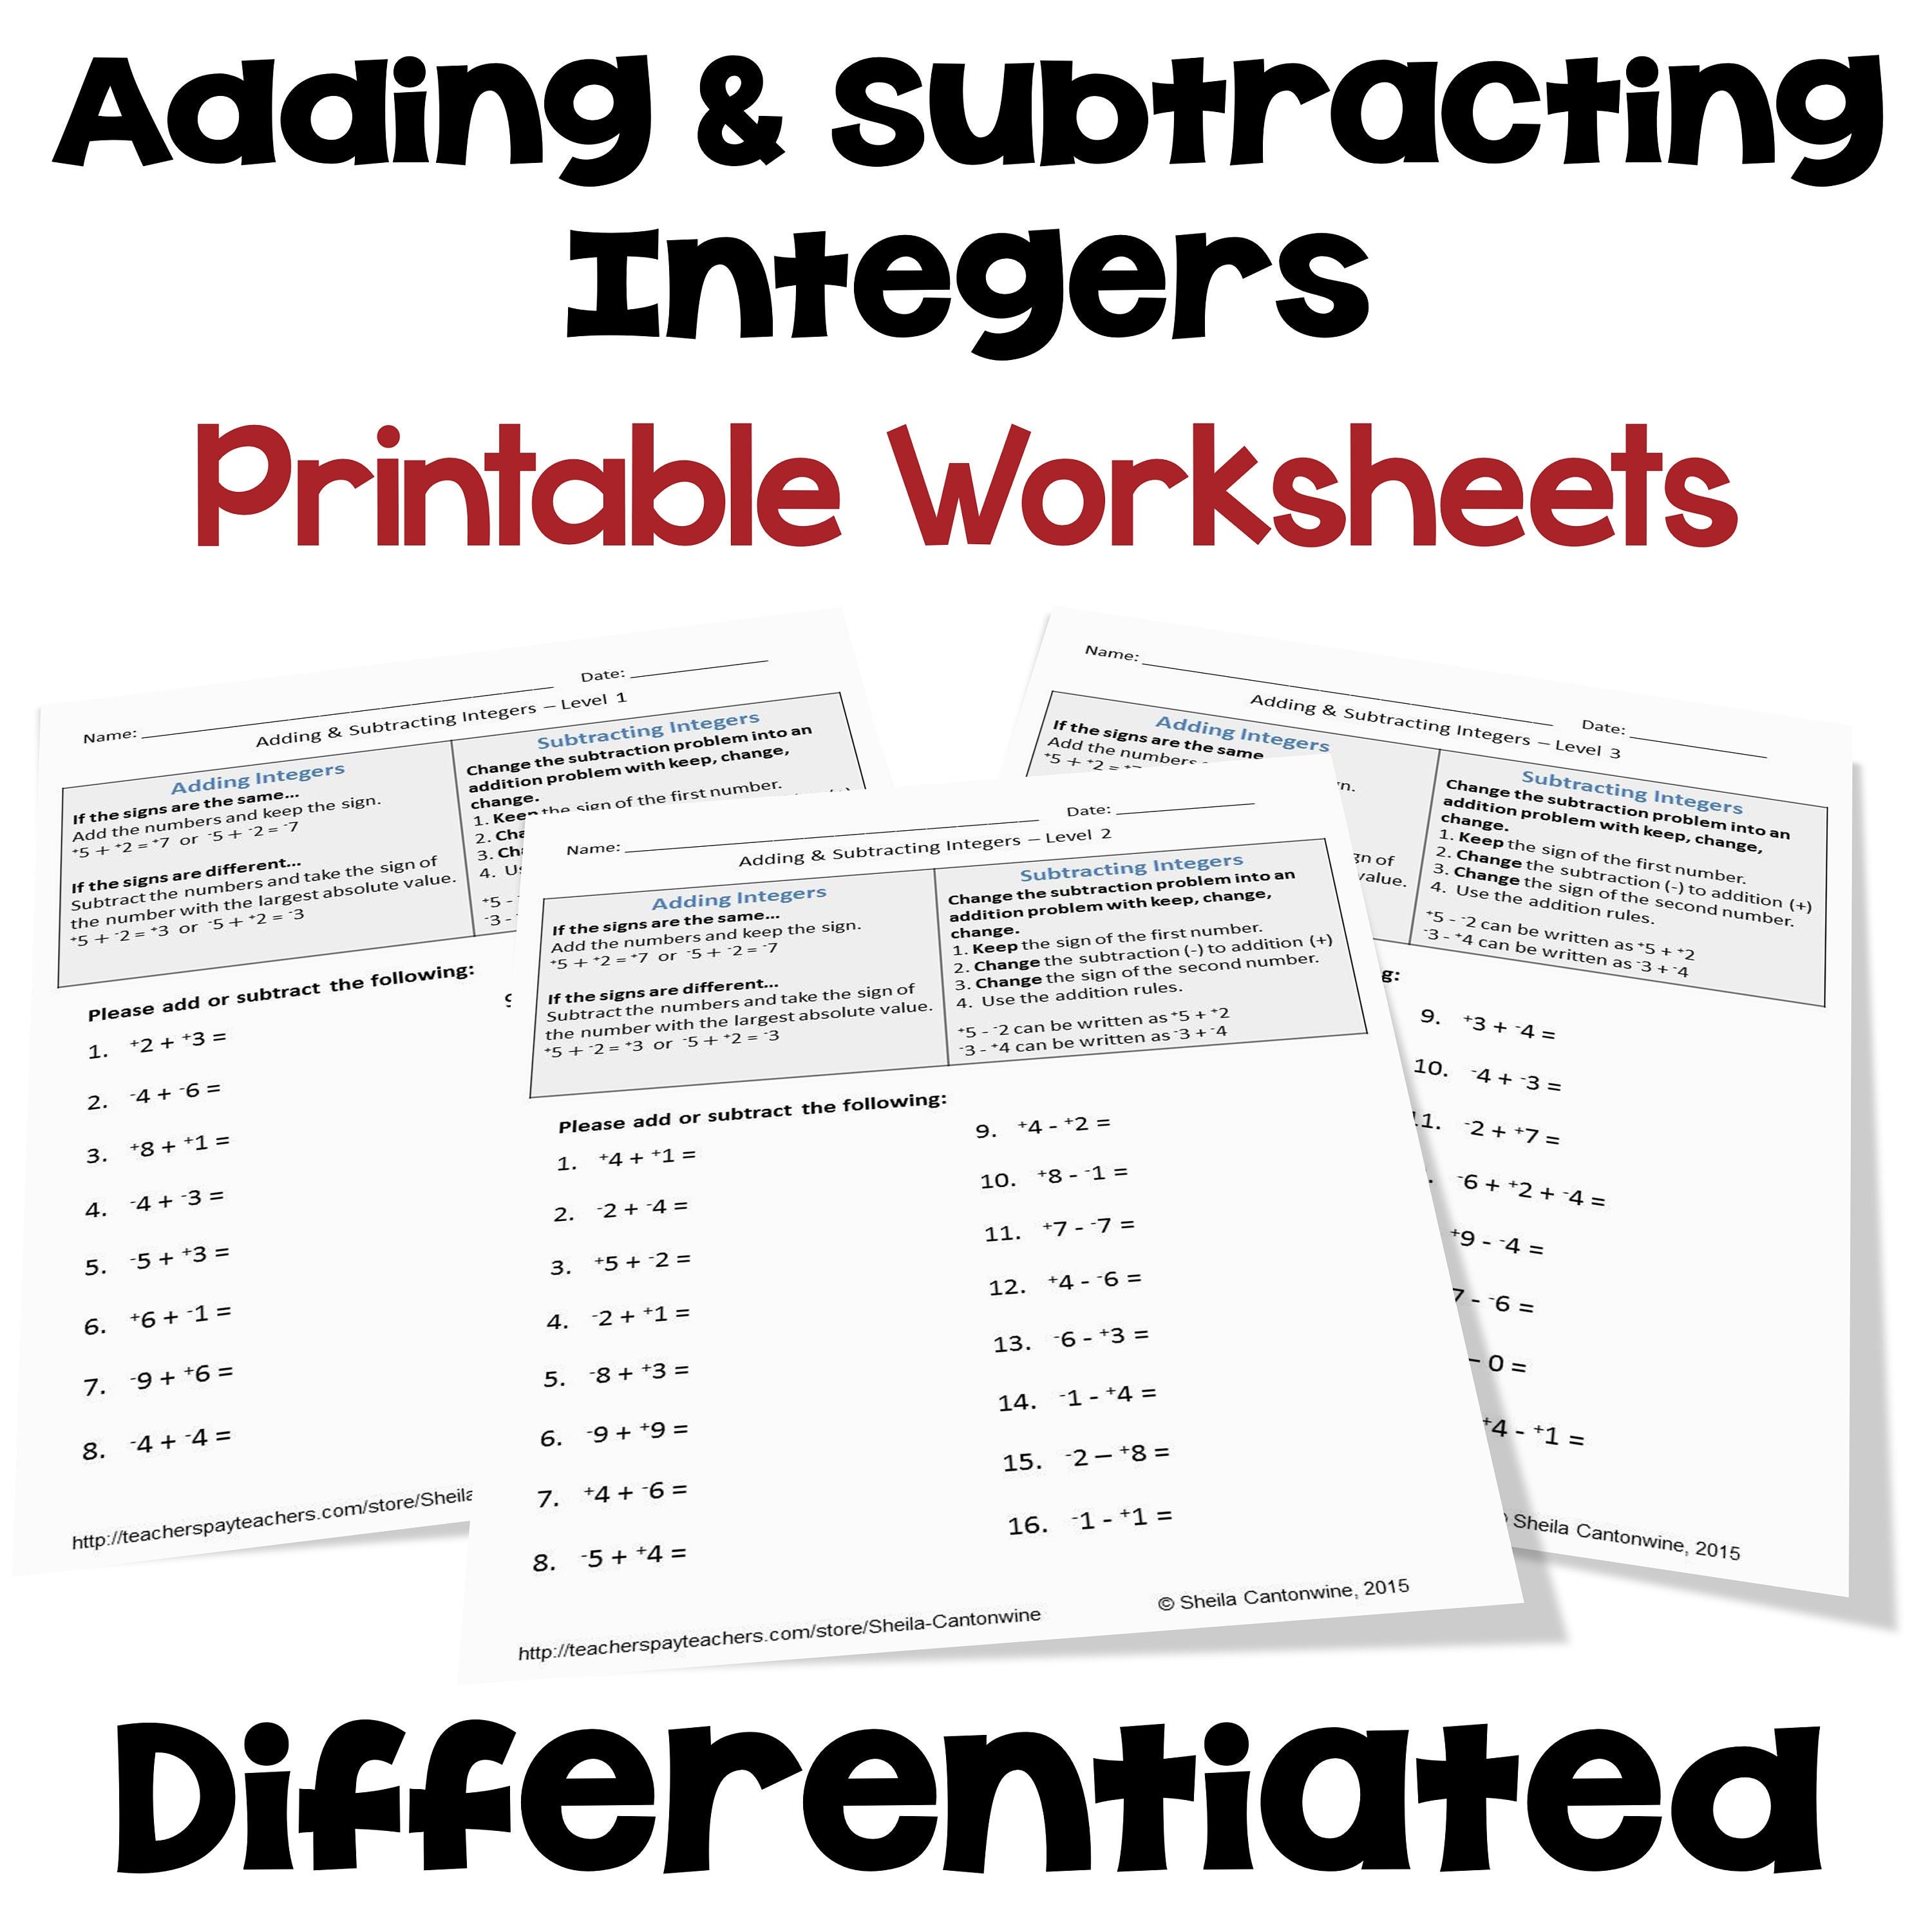 Free Printable Worksheets For Adding And Subtracting Integers